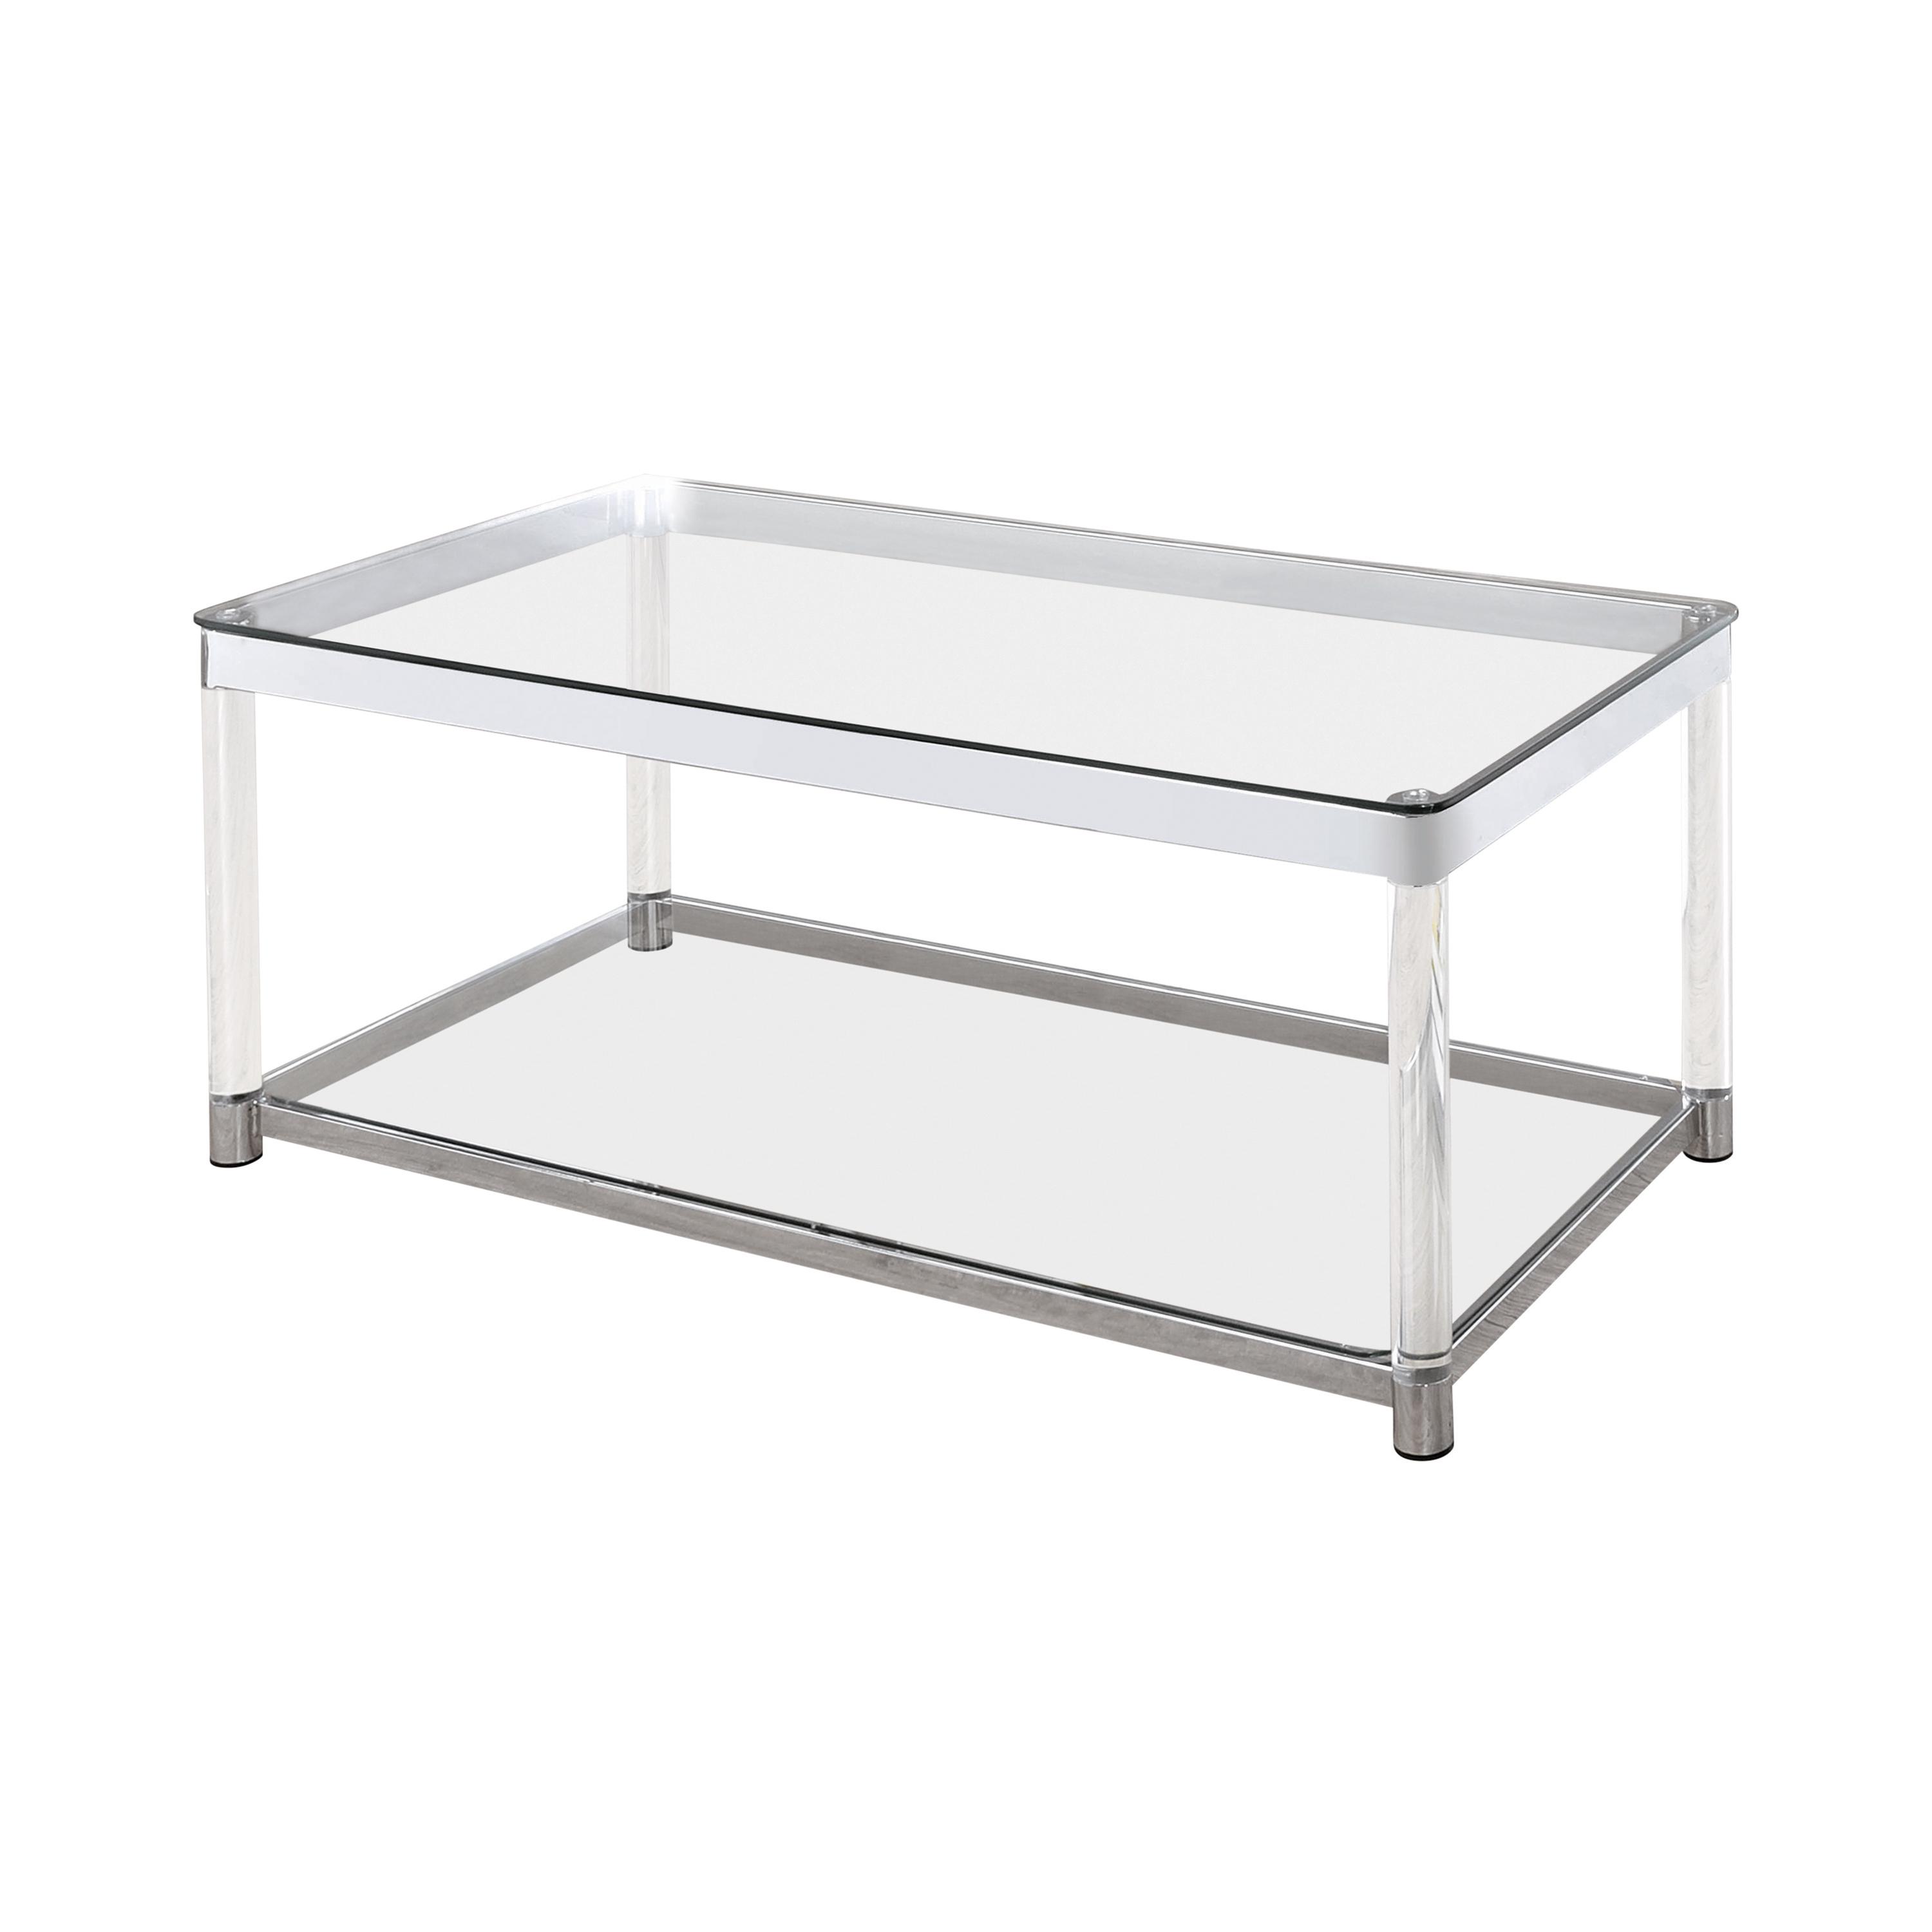 Contemporary Coffee Table 720748 Claude 720748 in Chrome, Clear 